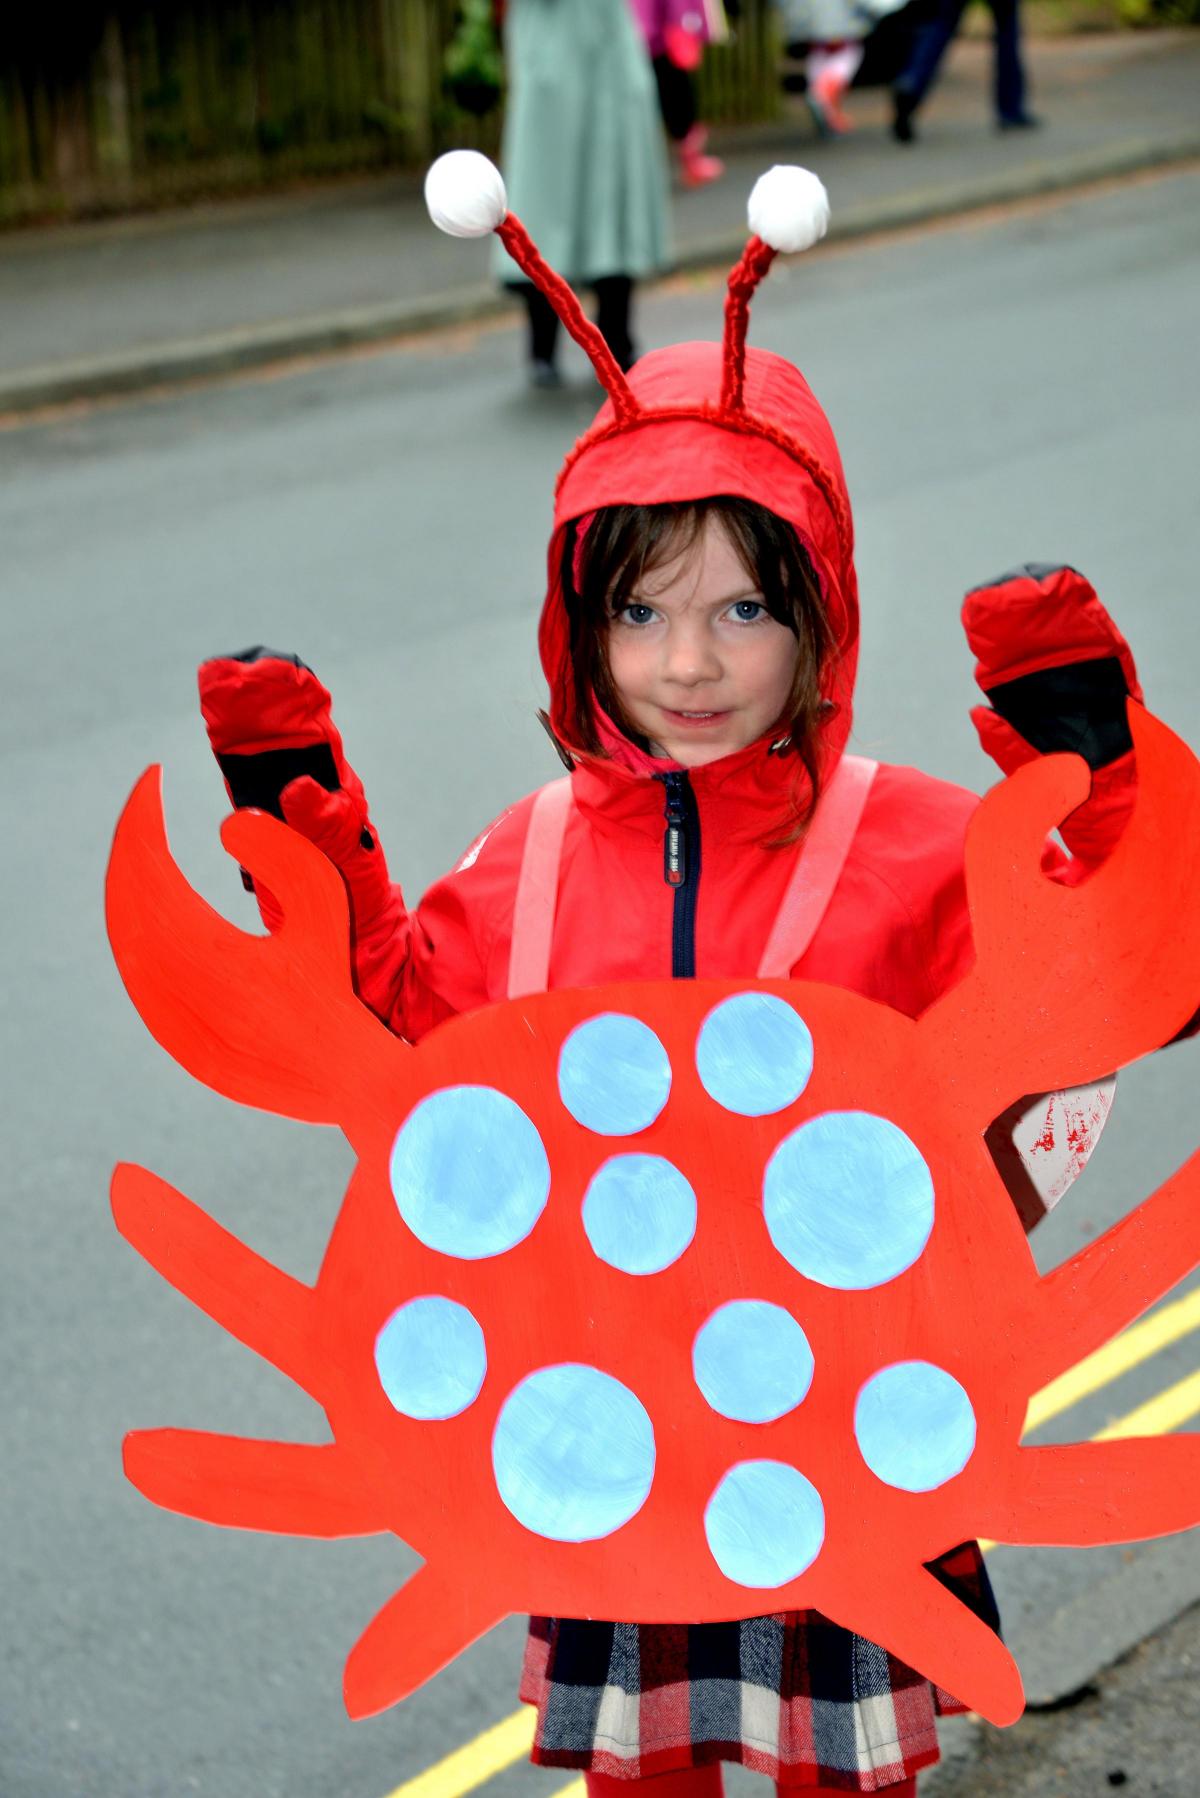 All Saints School pupil Bronte Neasham-Carr, aged five, at Ilkley Carnival